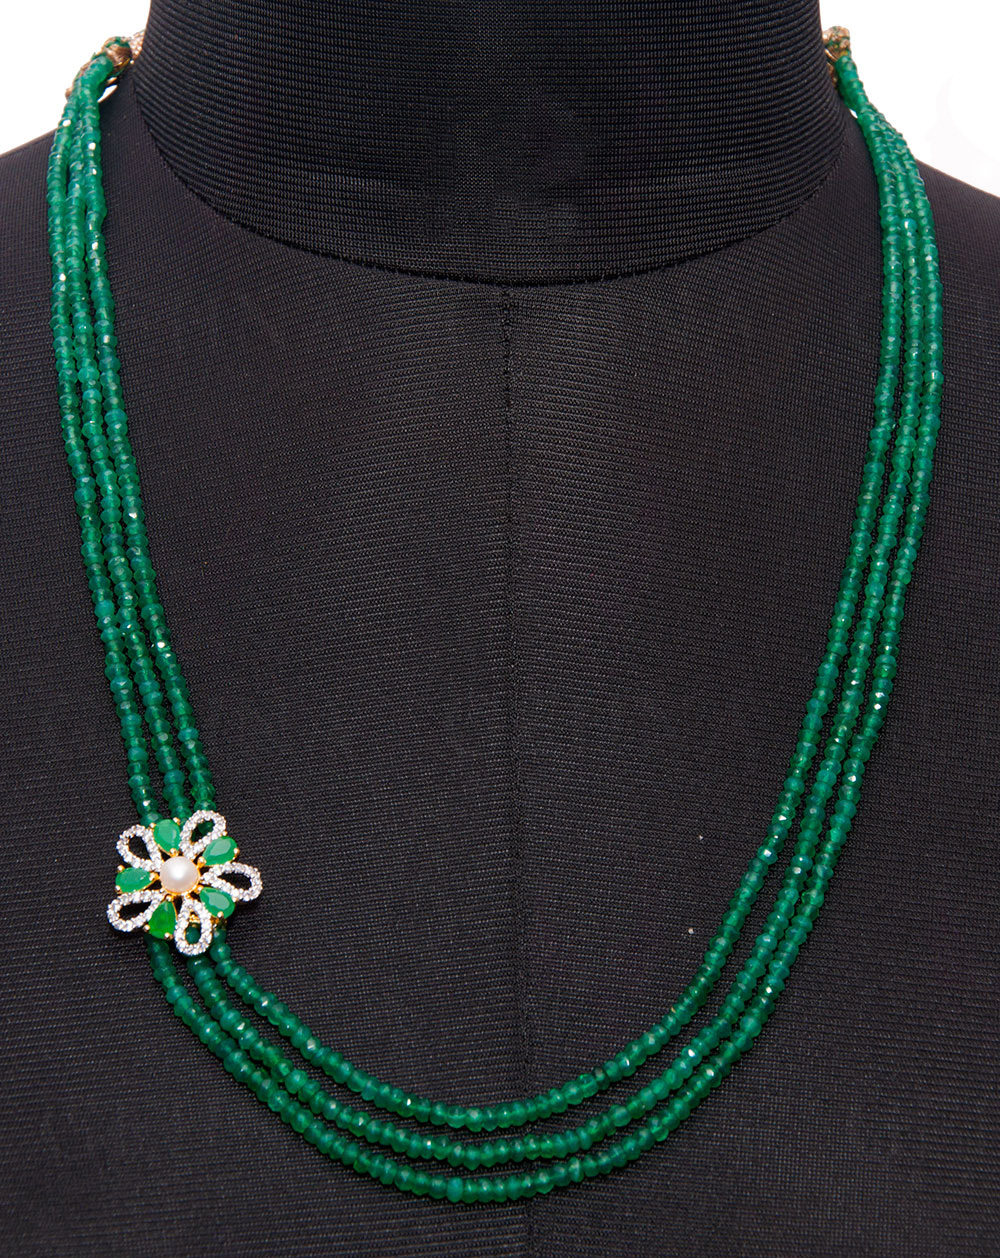 3 Rows Necklace Of Emerald With Pearl & Emerald Studded Side Pendant FN-1029